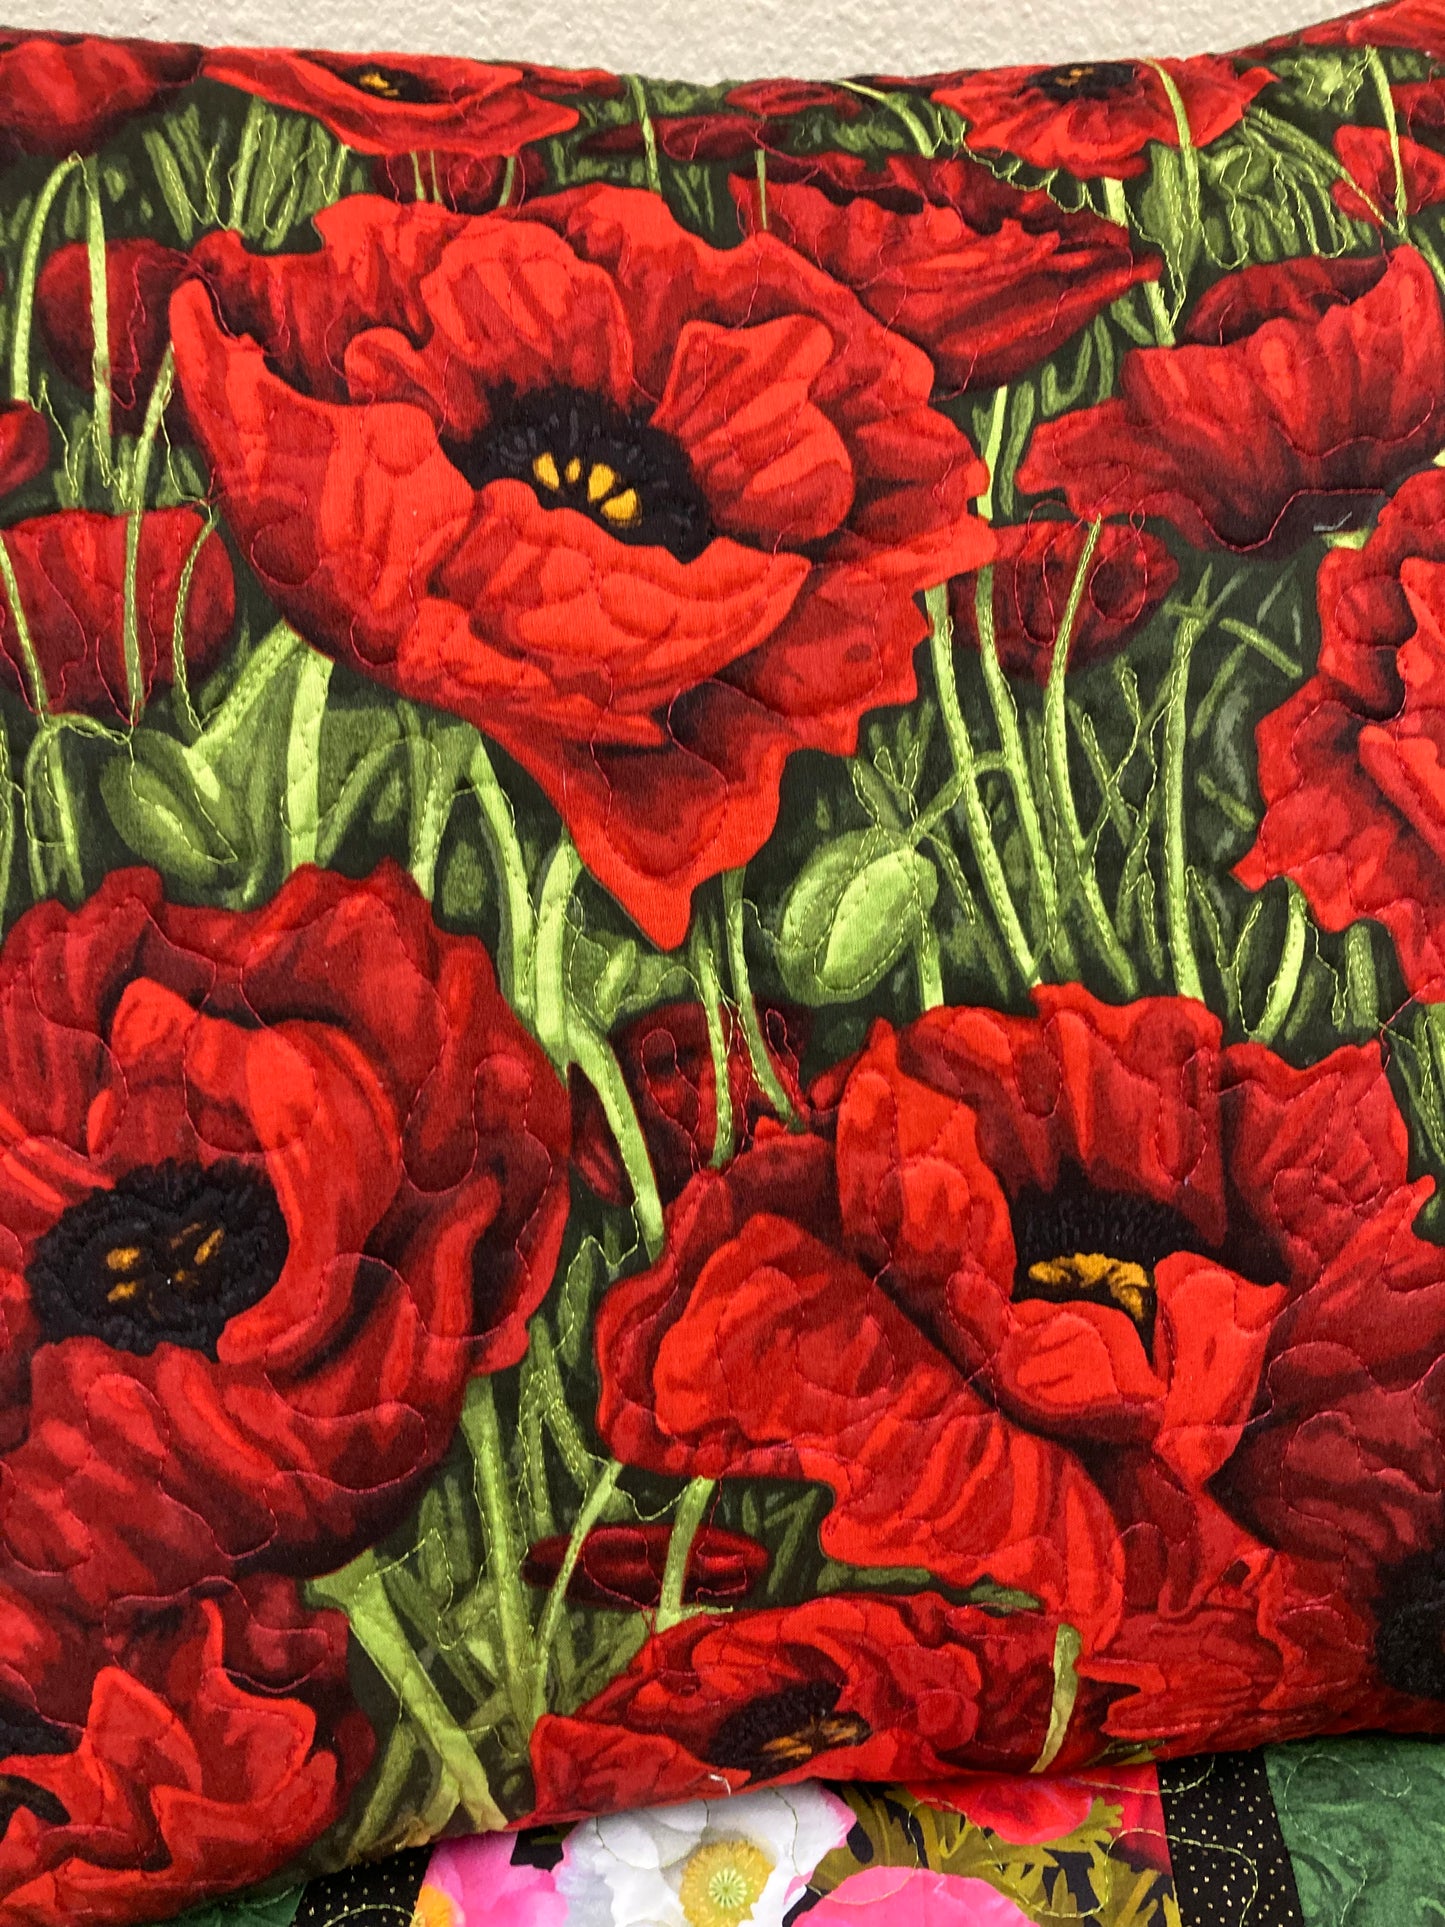 Red Poppy Quilted Fabric Art Pillow, Textile 18x18", Sofa Chair Bedroom Living Room Couch Designer Chic Red Bright Poppies Toss Throw Pillow